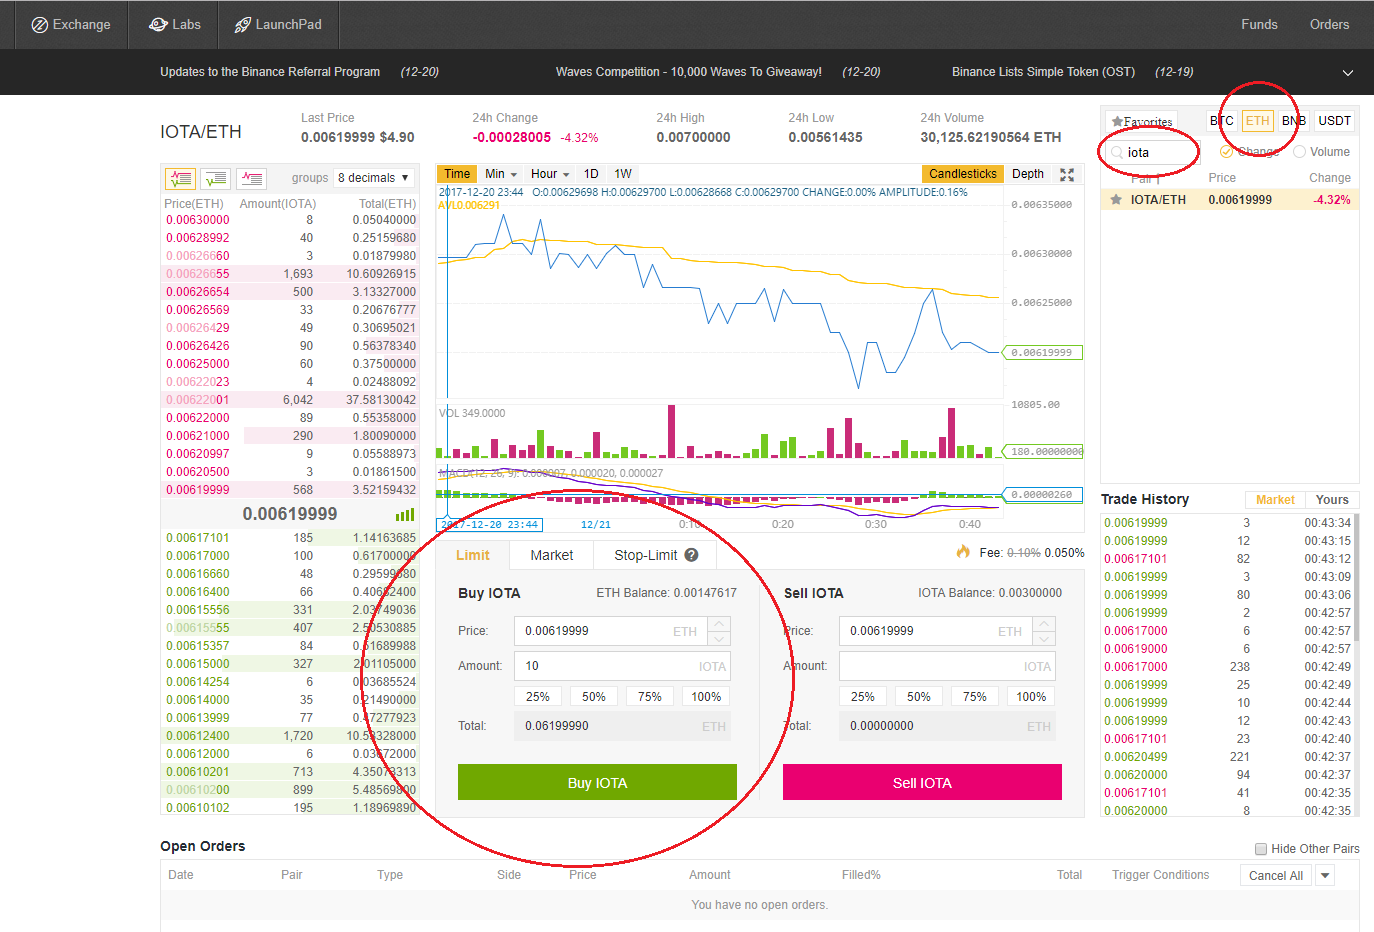 setting up your wallet to use bitstamp